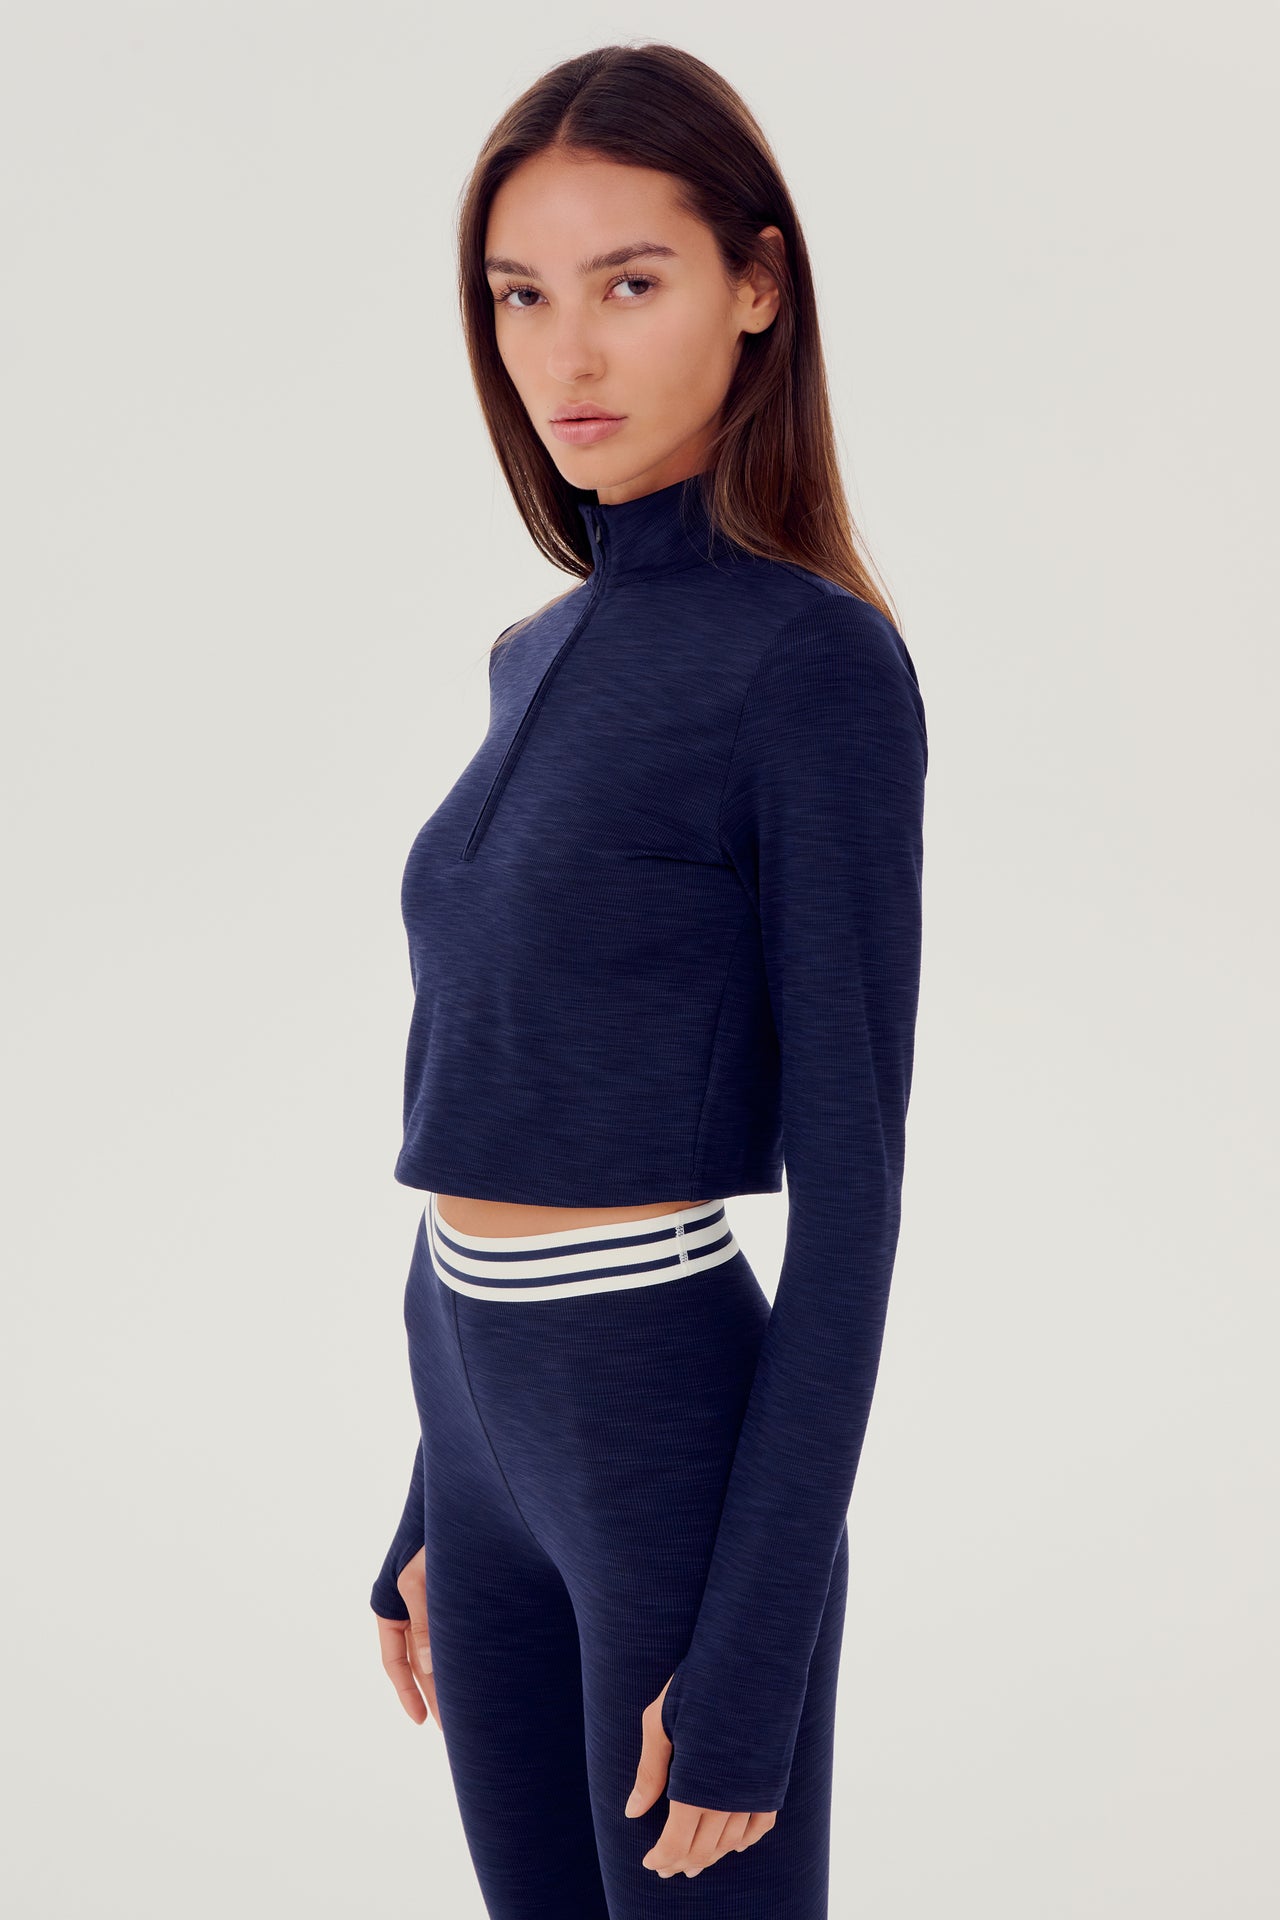 Front view of woman with brown straight hair wearing a dark blue cropped sweatshirt with collar, and dark blue leggings with white and dark blue stripes on the waistband